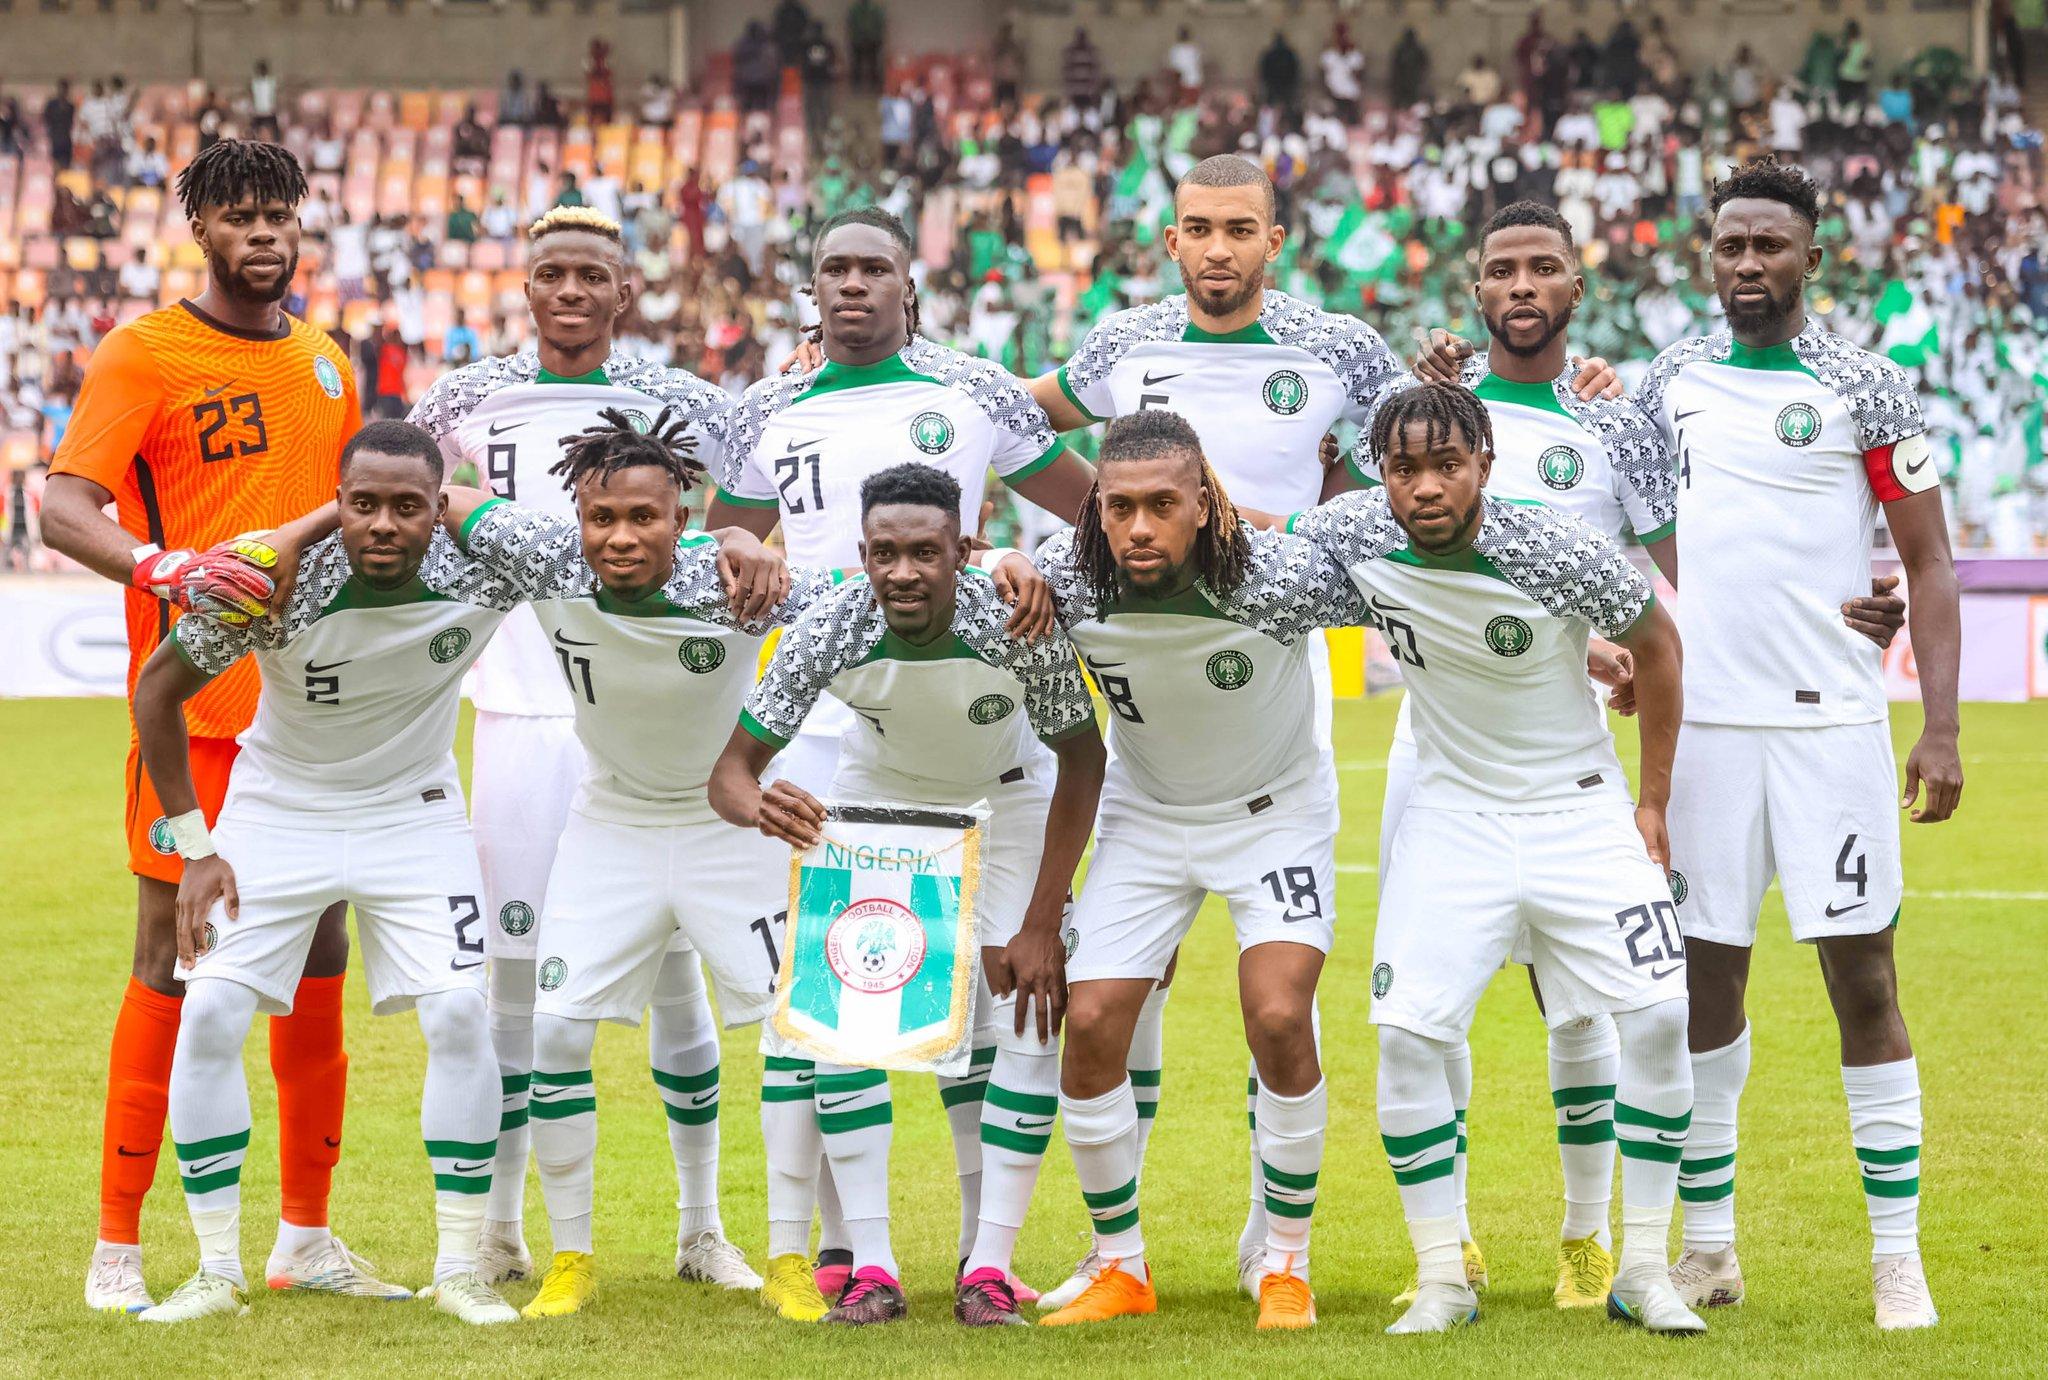 AFCON 2023 Qualifiers: Osimhen fires blanks, but Osayi-Samuel’s brilliance gives Nigeria bright hopes